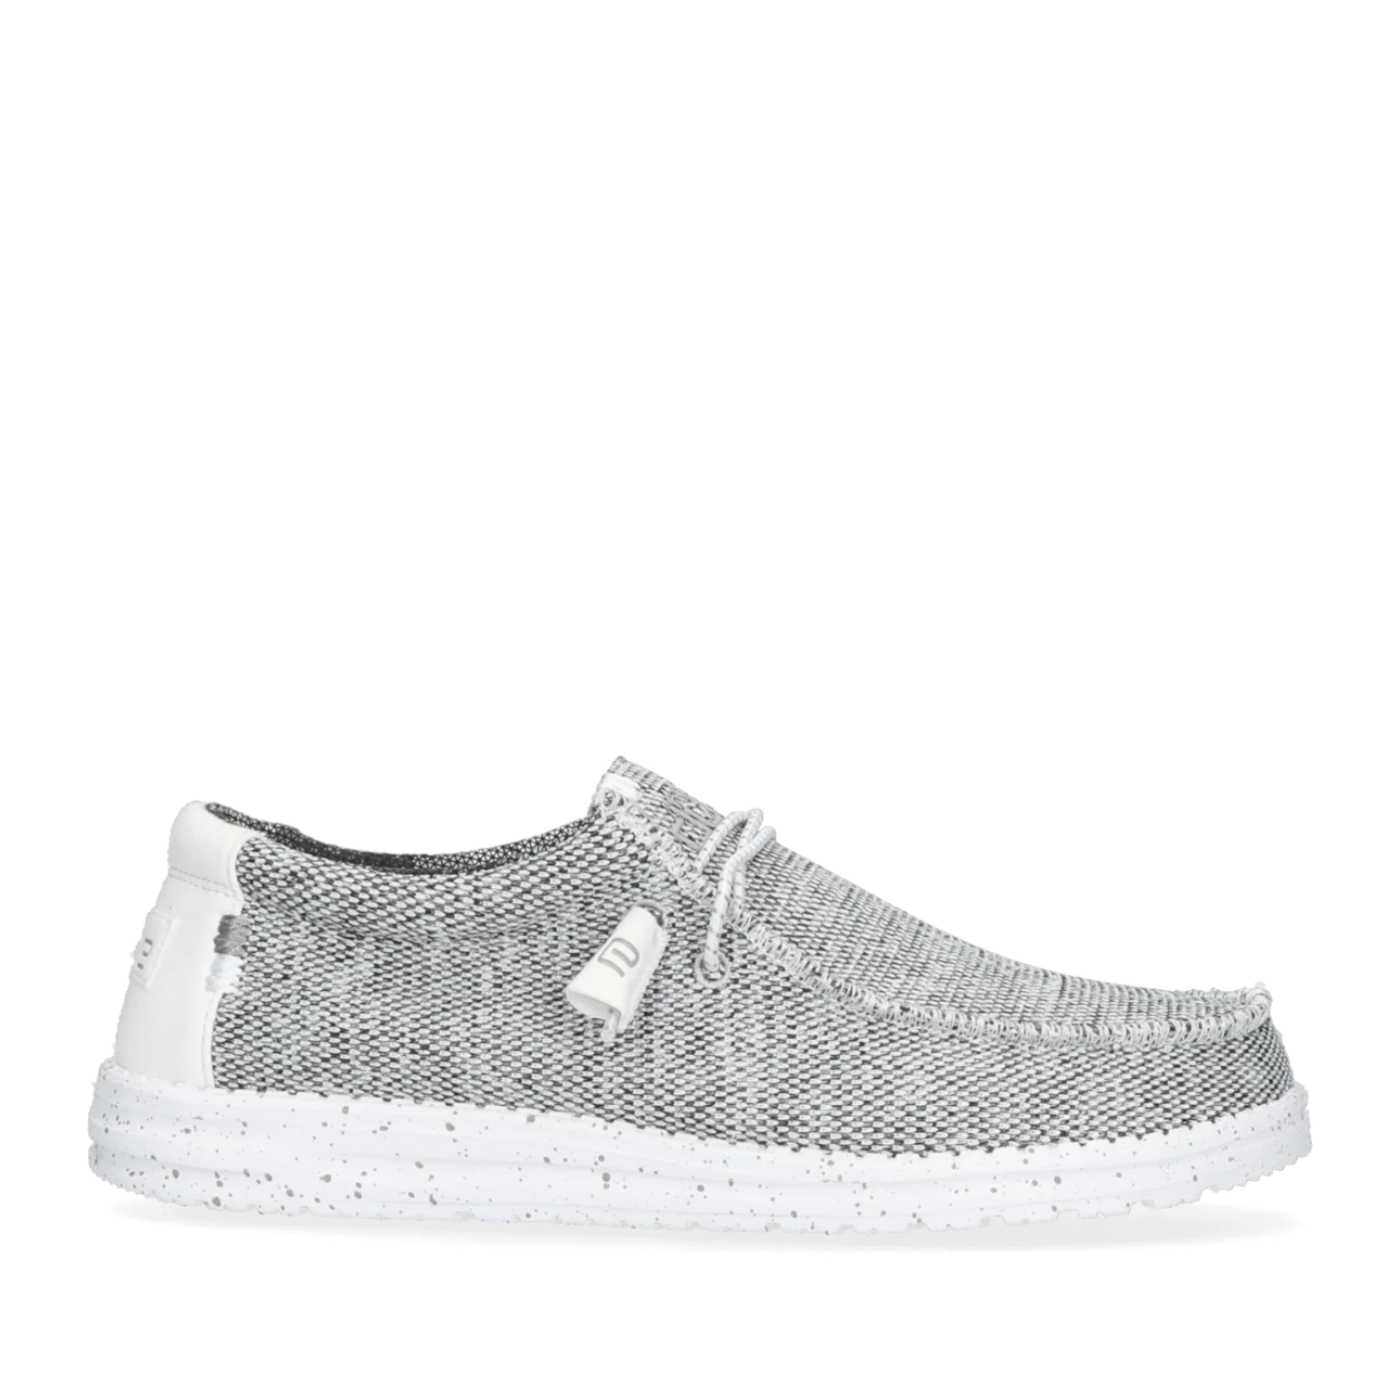 Hey Dude Wally Knit Moccasins Free Shipping At Academy, 49% OFF